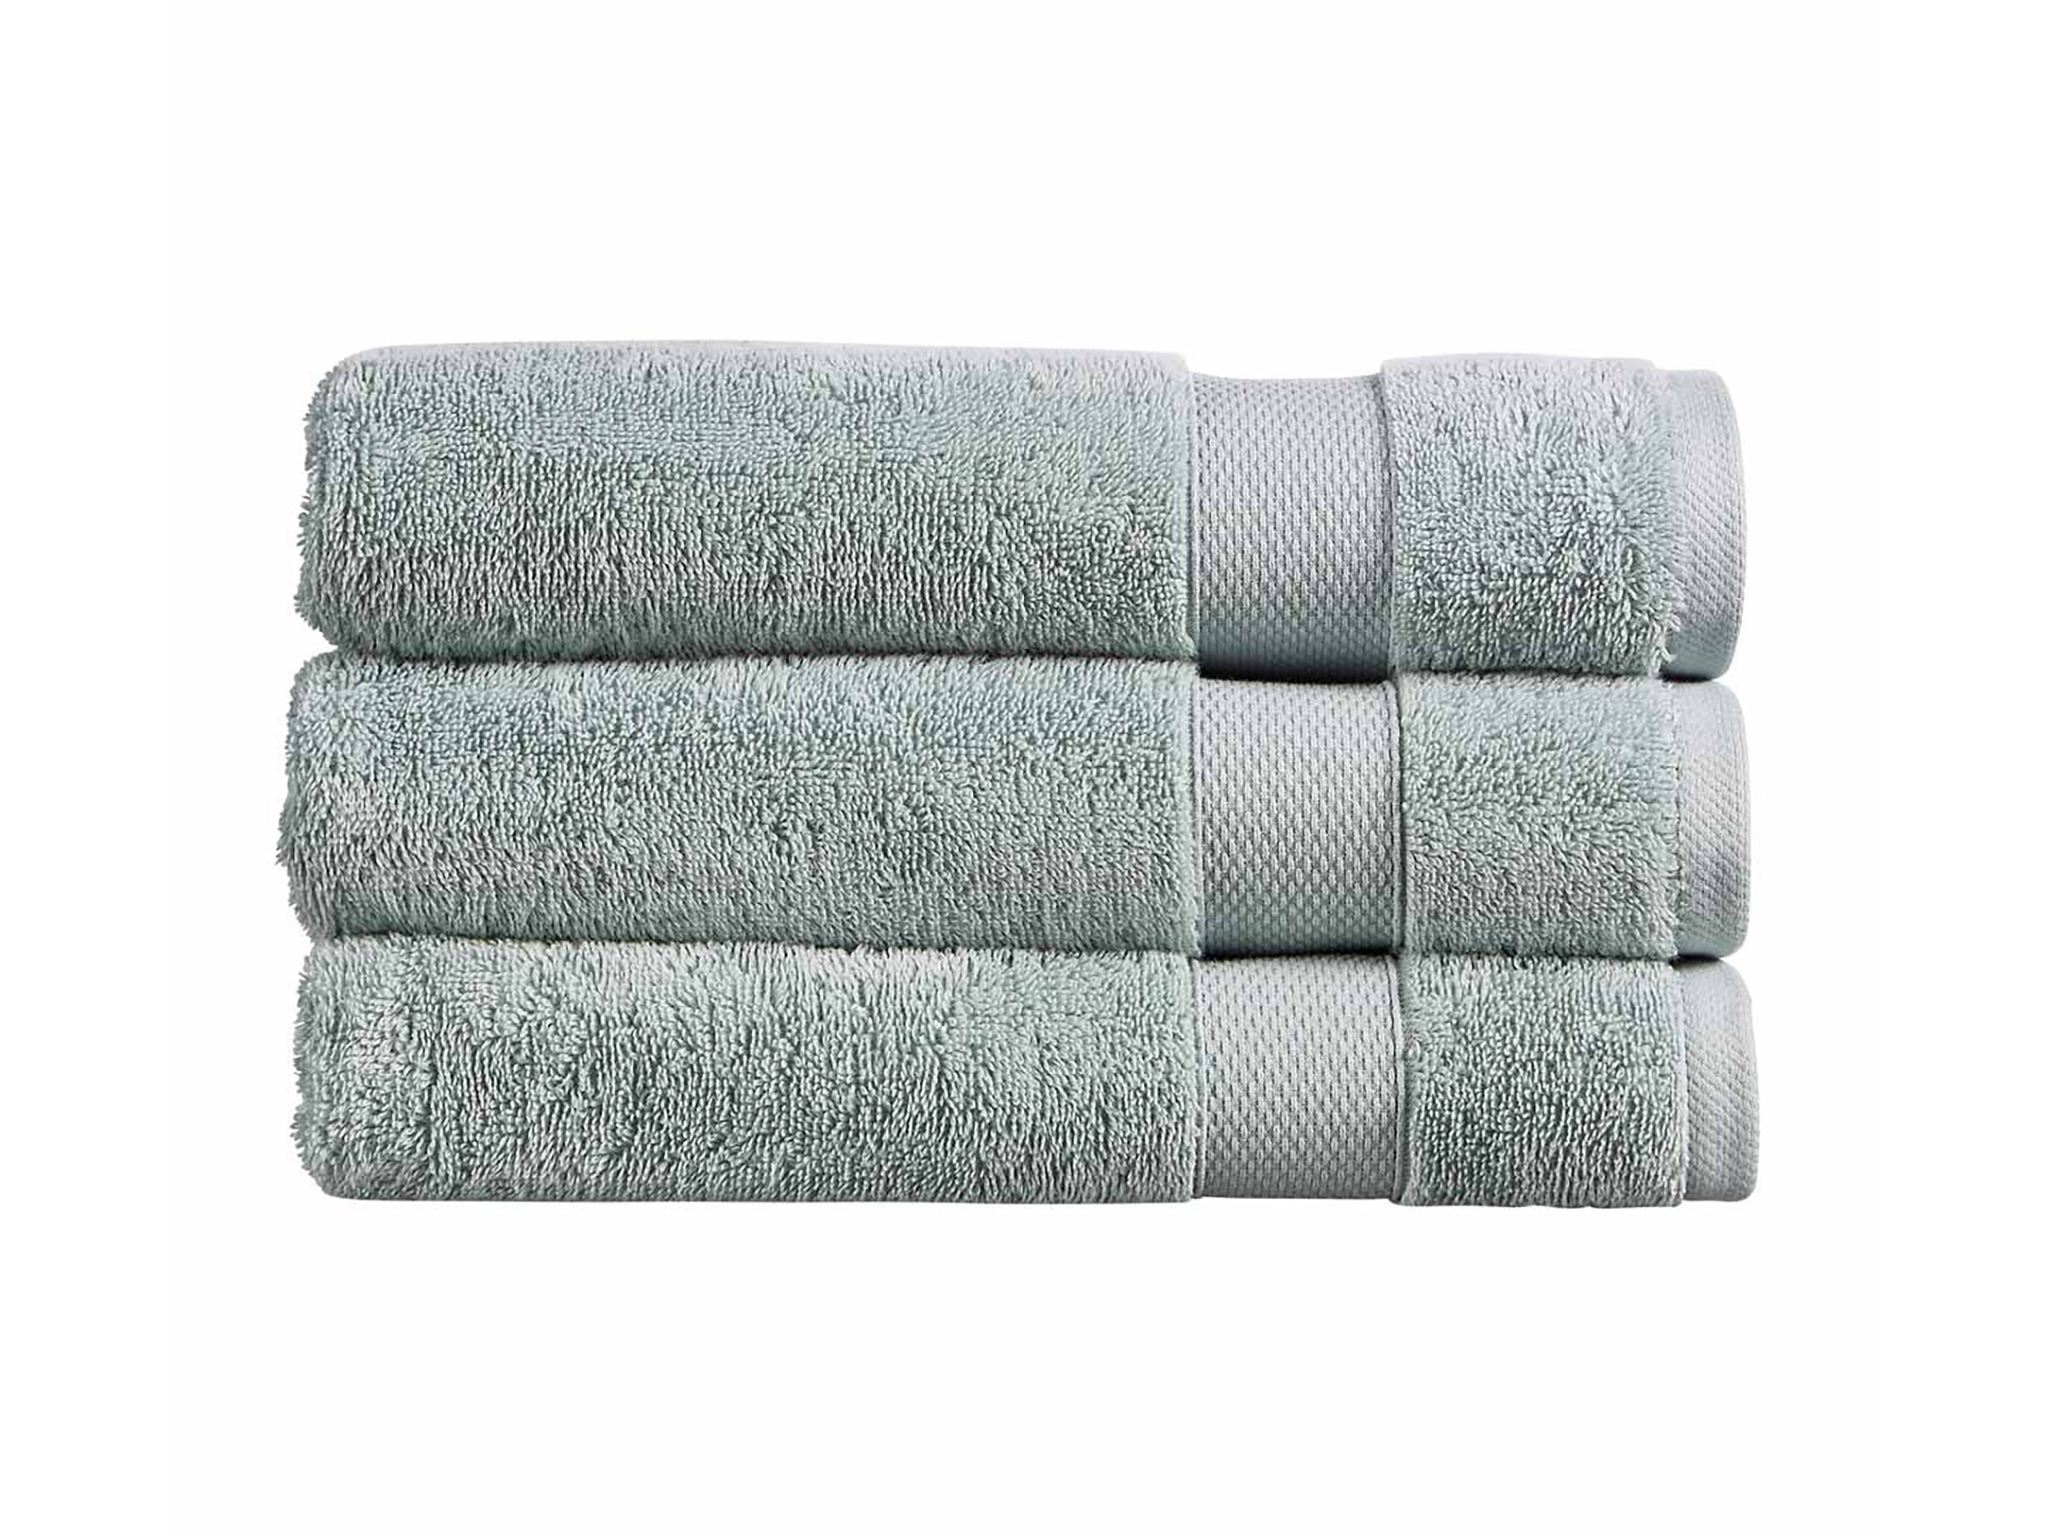 Christy Home Towels Review Blog UK